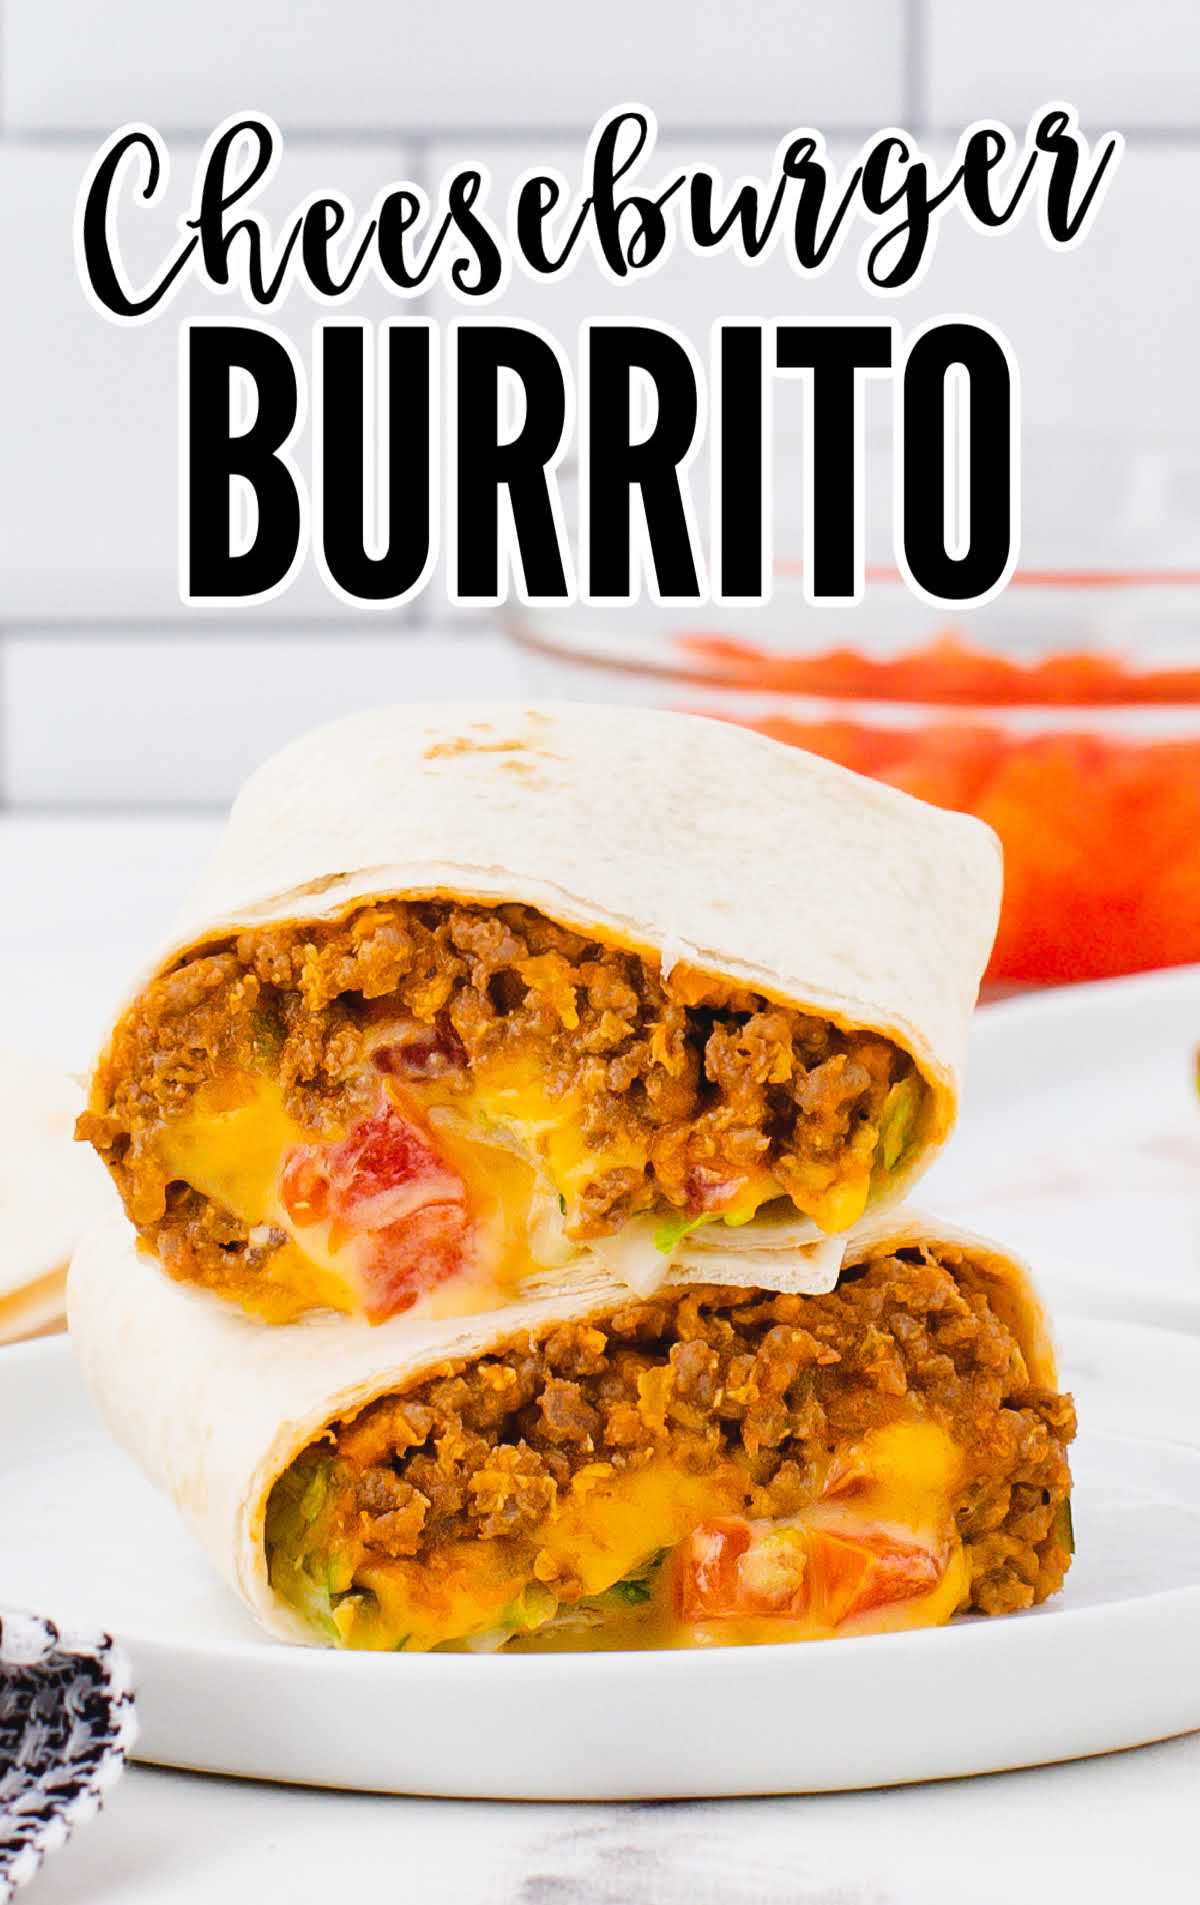 A plate of food, with Cheeseburger burrito